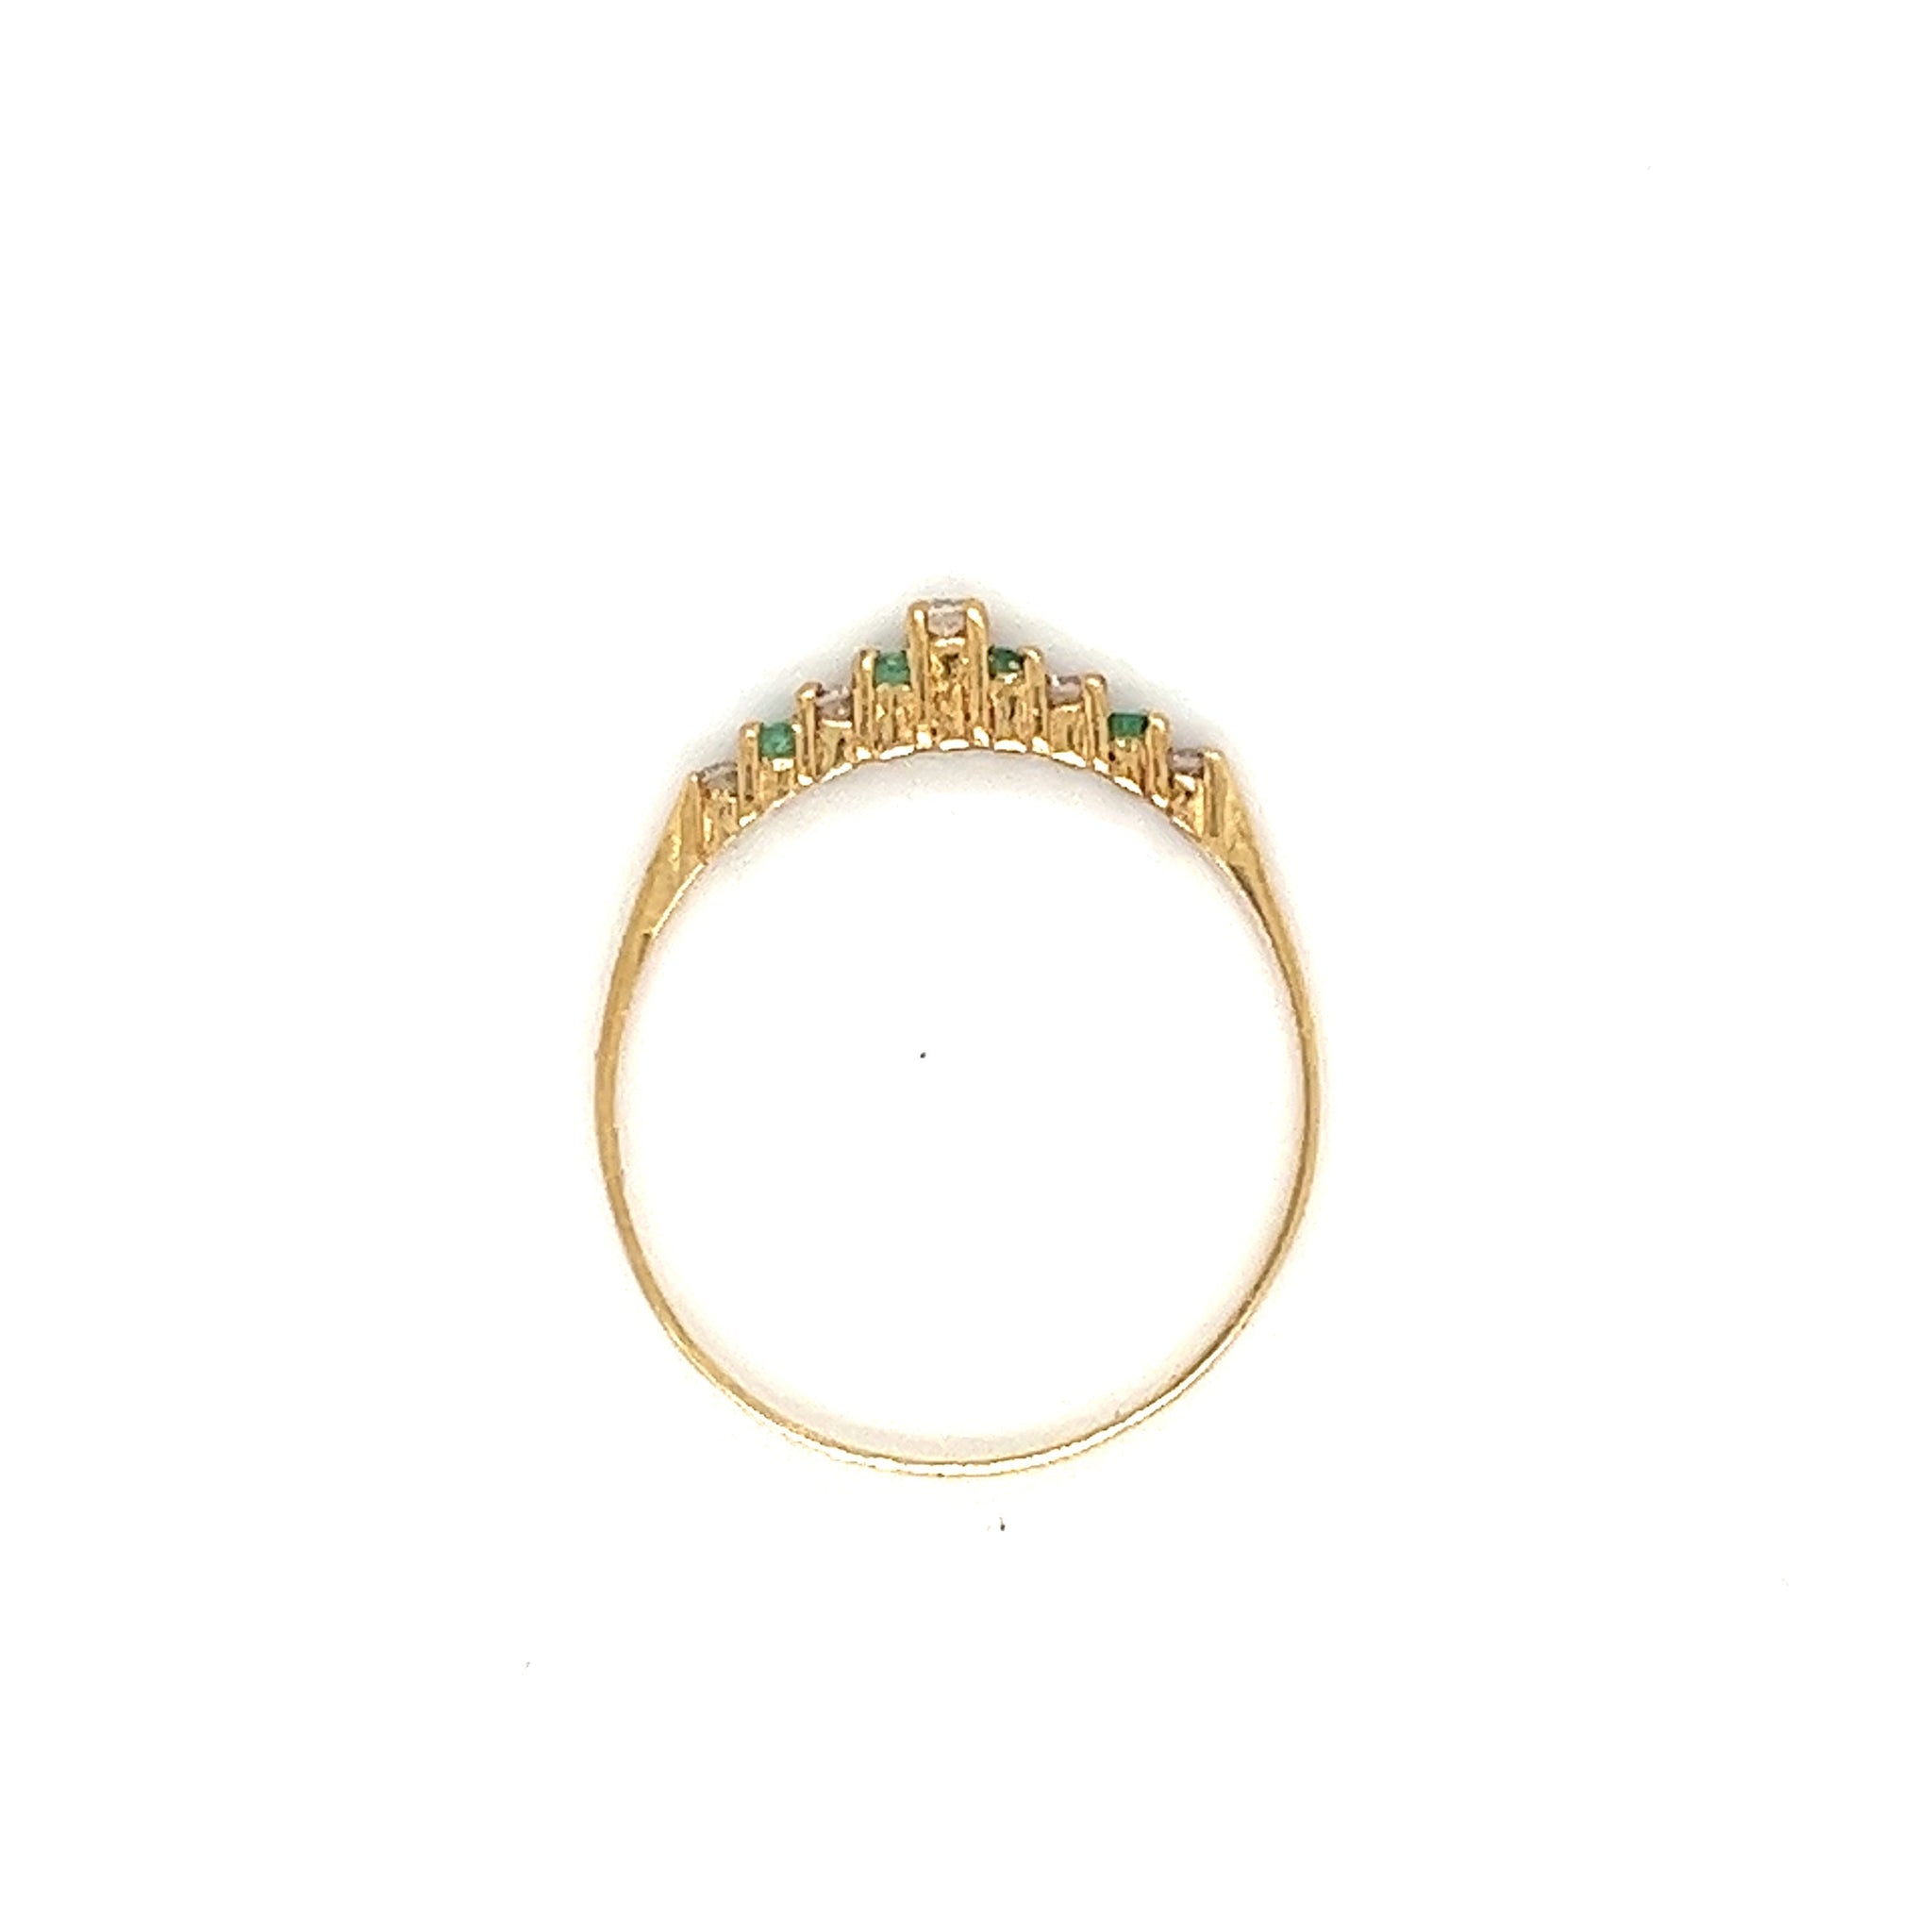 Thin Dainty Emerald and Diamond Band Ring in 14K Gold-Rings-ASSAY